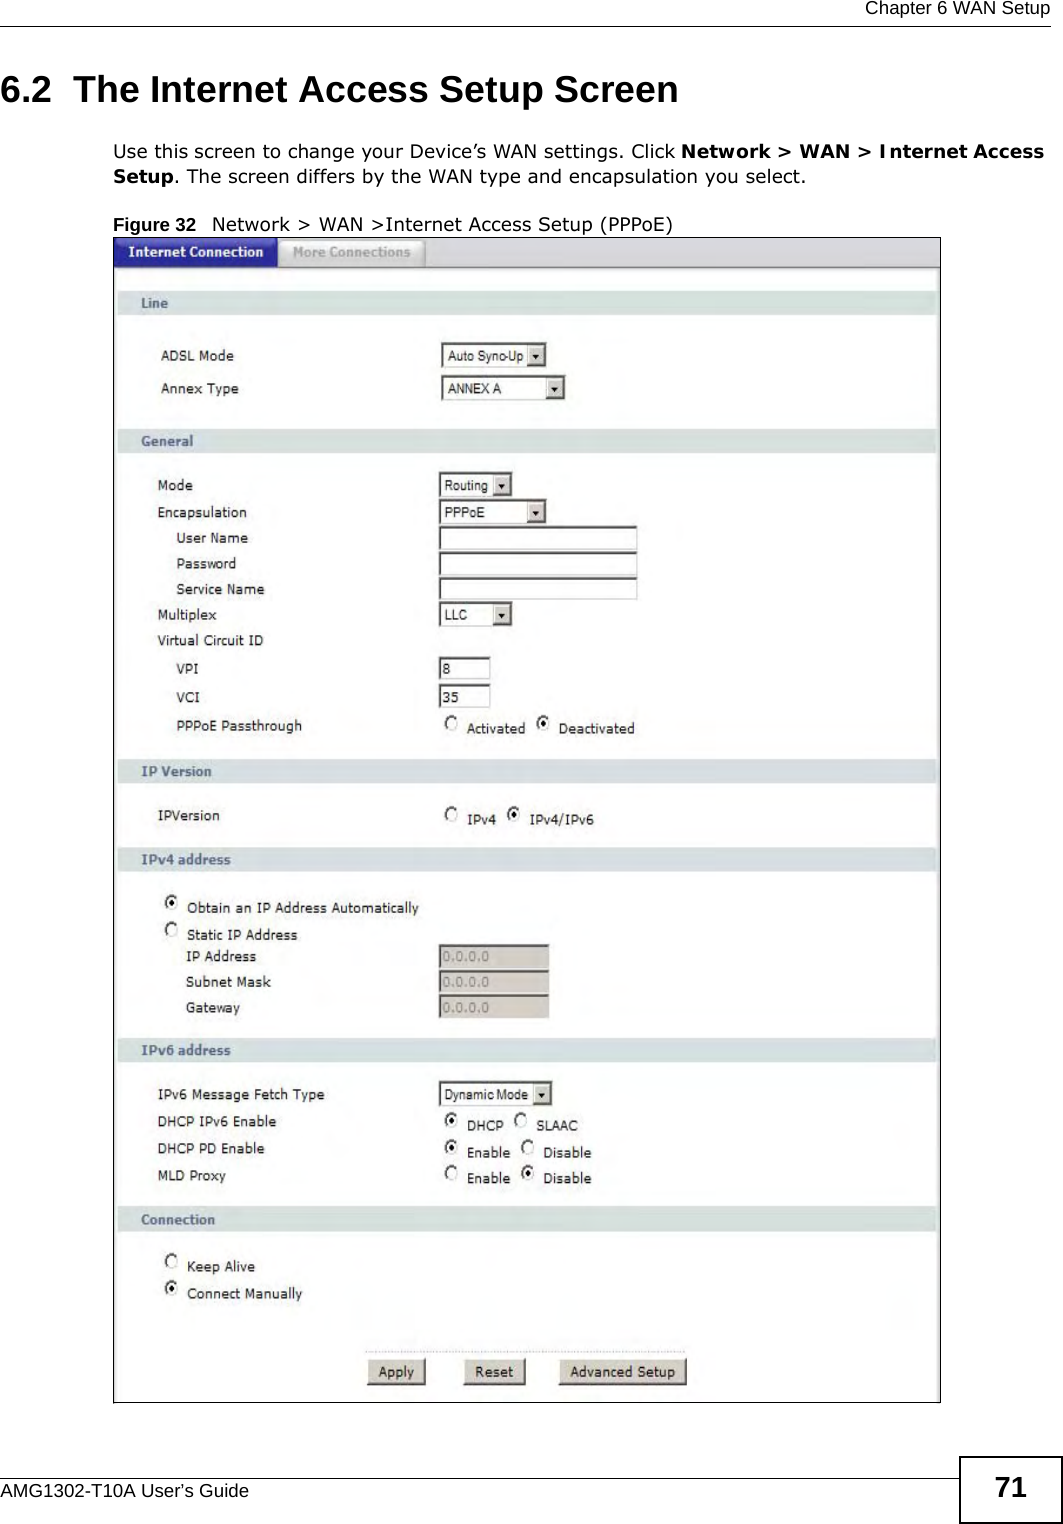  Chapter 6 WAN SetupAMG1302-T10A User’s Guide 716.2  The Internet Access Setup ScreenUse this screen to change your Device’s WAN settings. Click Network &gt; WAN &gt; Internet Access Setup. The screen differs by the WAN type and encapsulation you select.Figure 32   Network &gt; WAN &gt;Internet Access Setup (PPPoE)